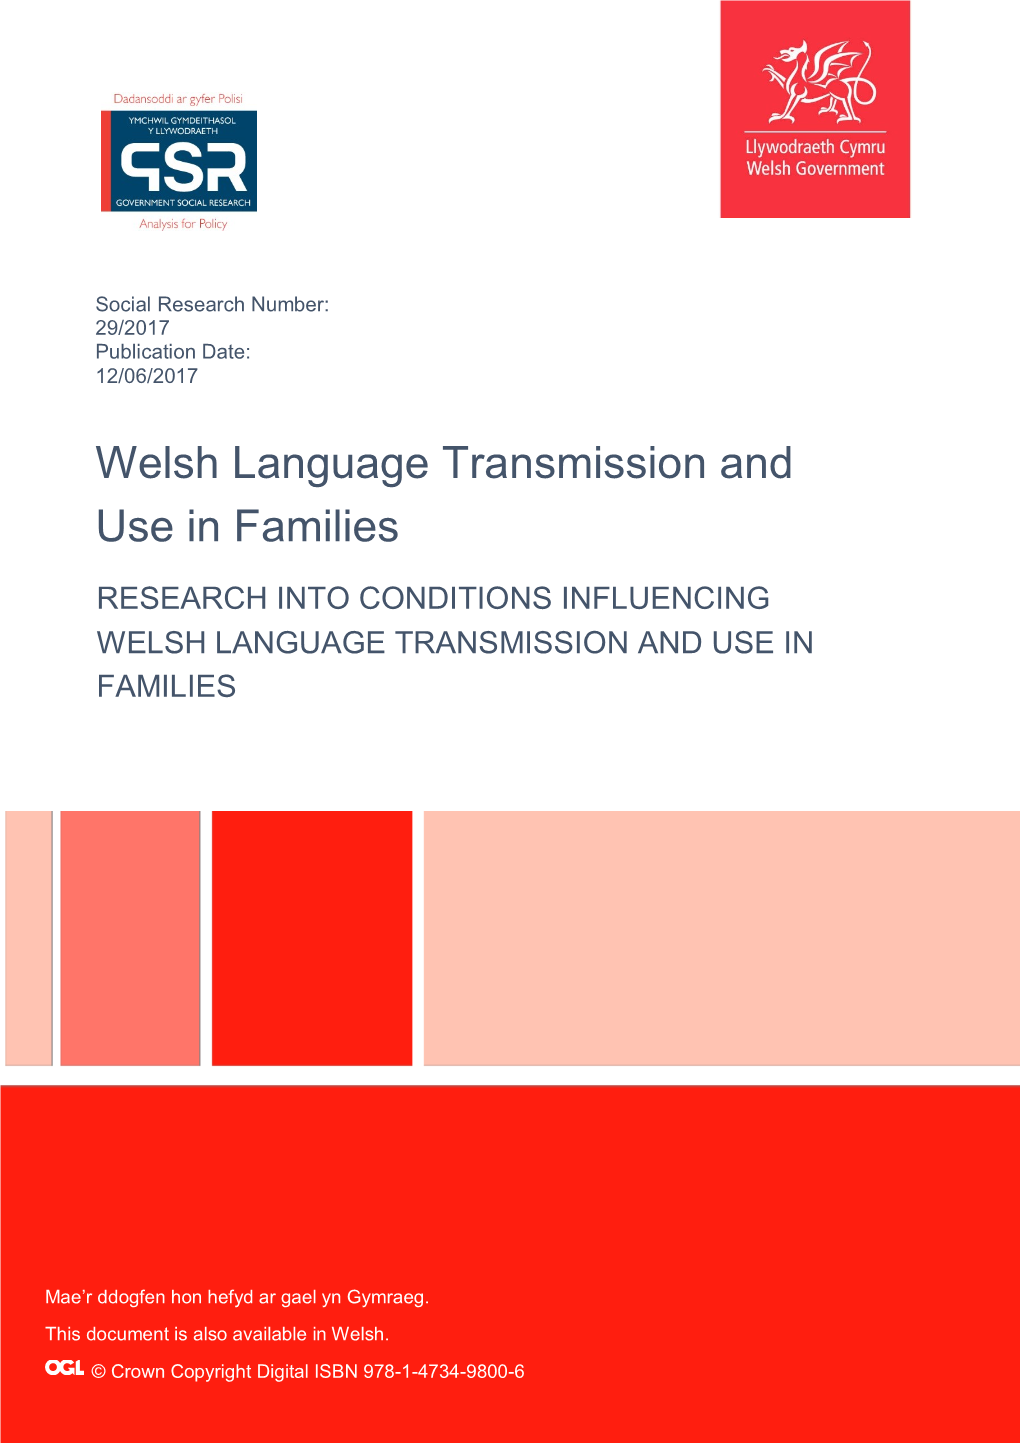 Welsh Language Transmission and Use in Families